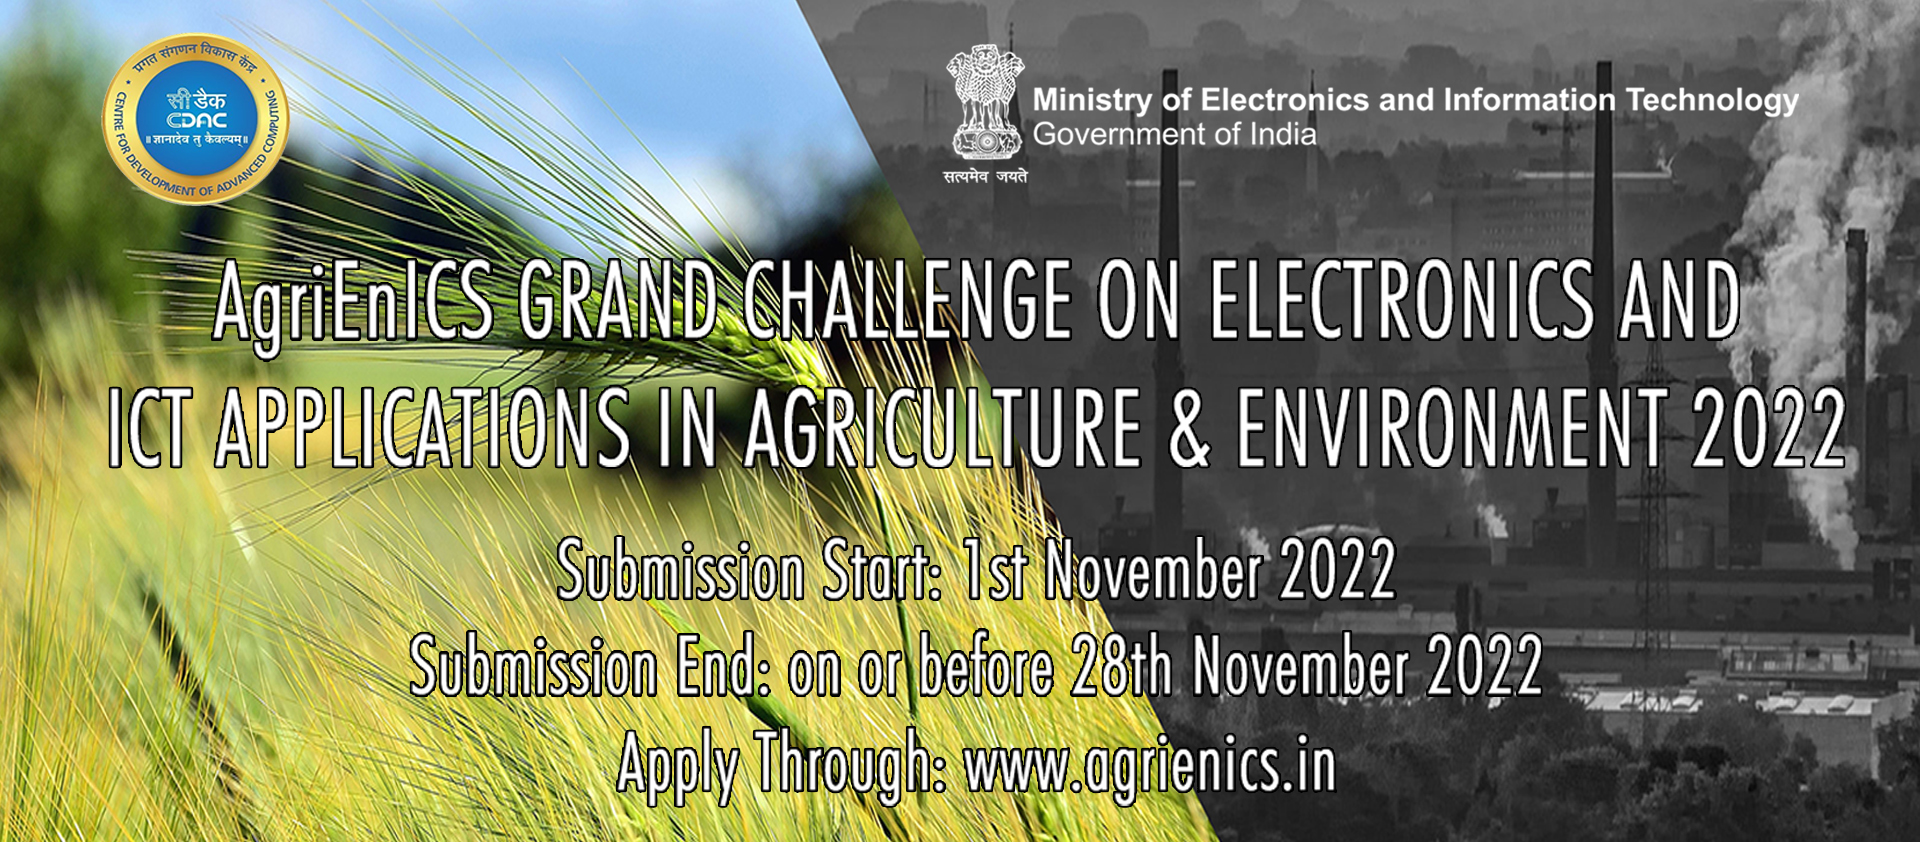 AgriEnIcs Grand challenge on Electronics and ICT applications in Agriculture and Environment 2022